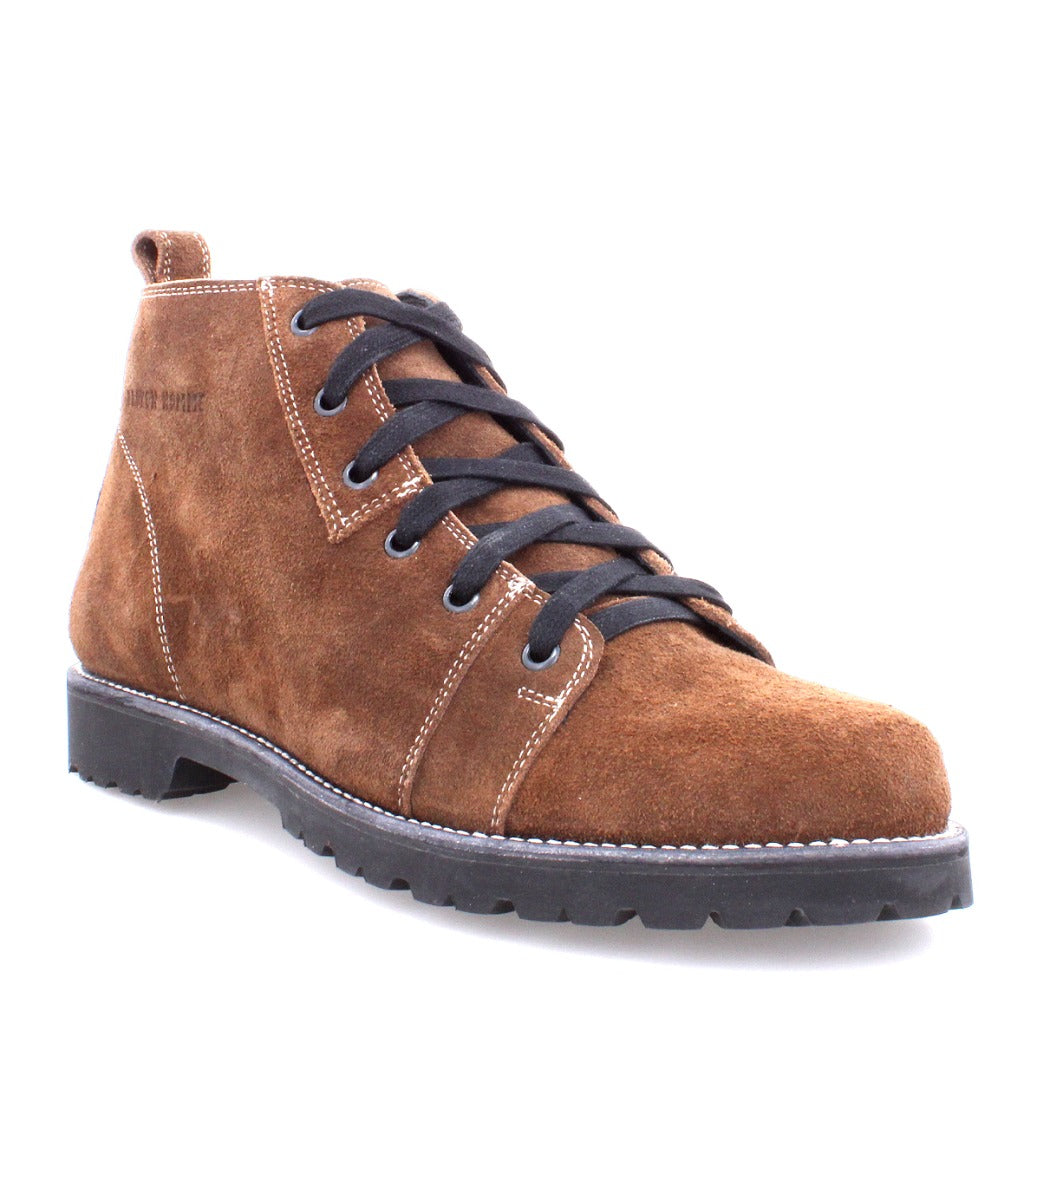 A brown suede Parker Boot with black laces, featuring a Vibram Lug hiking outsole, made by Broken Homme.